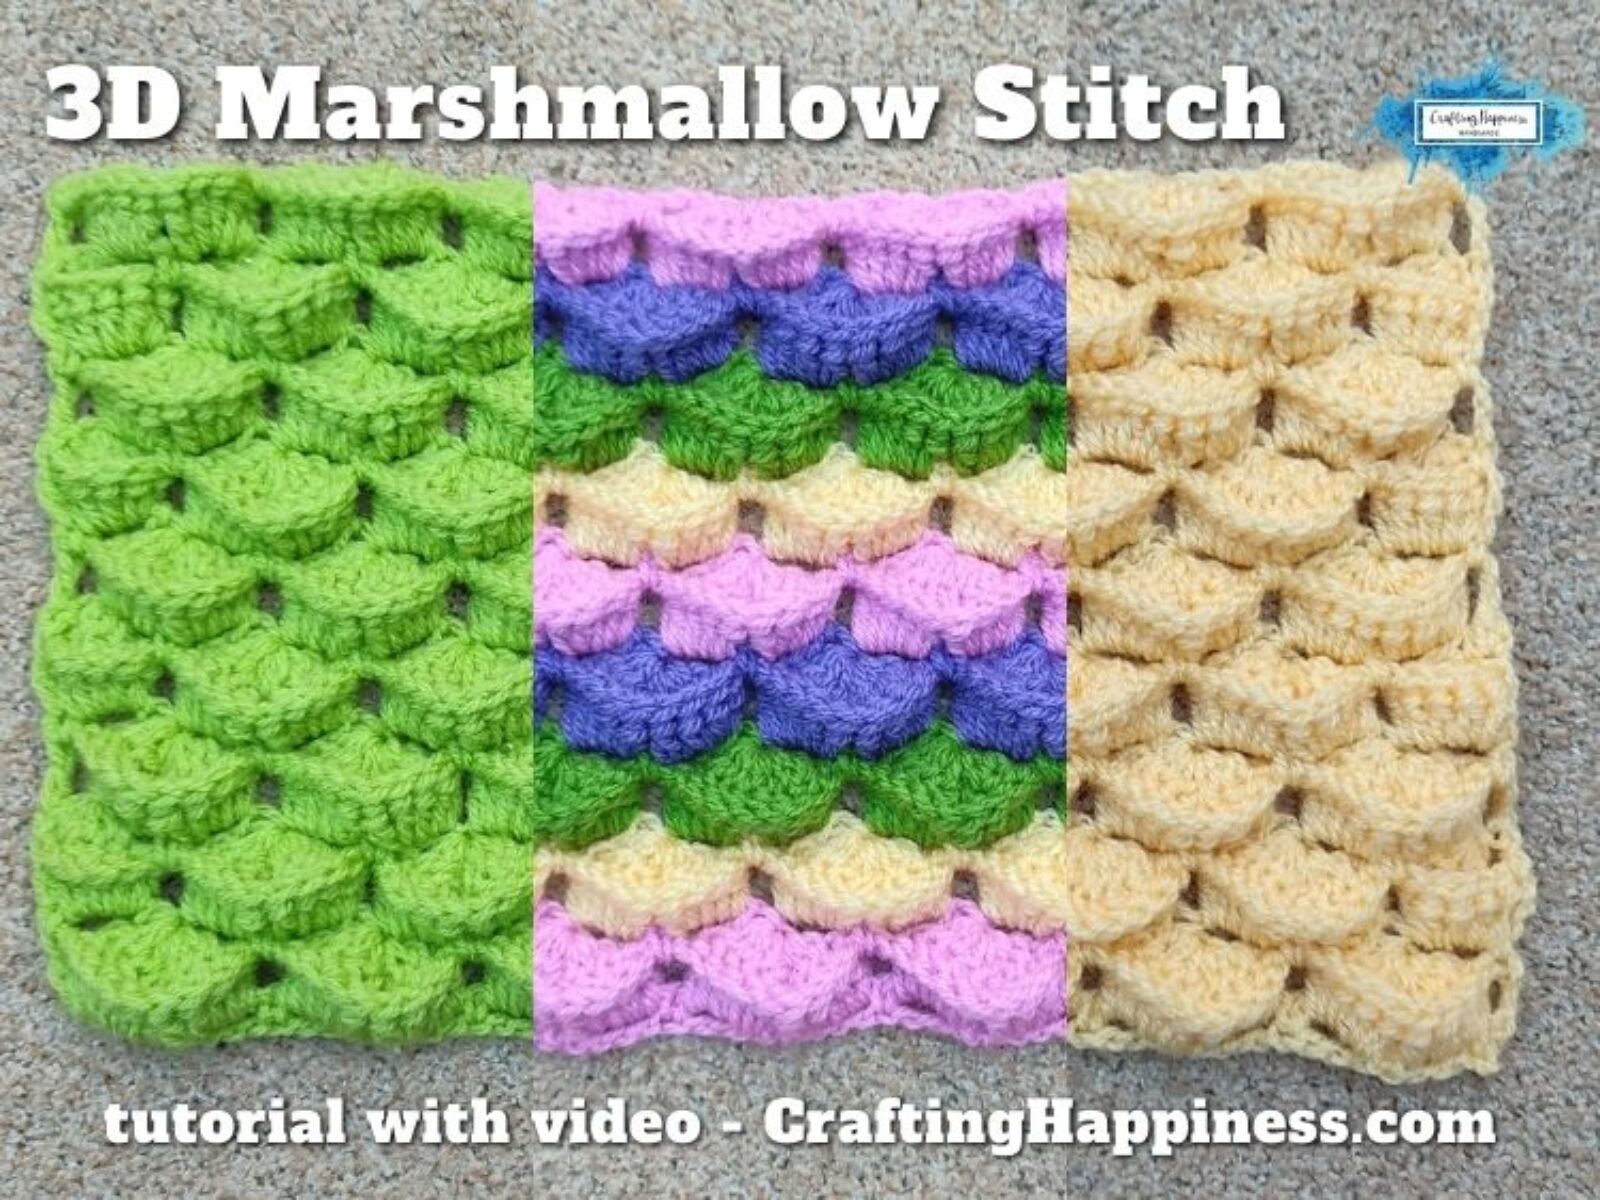 FB BLOG POSTER - 3D Marshmallow Stitch by Crafting Happiness